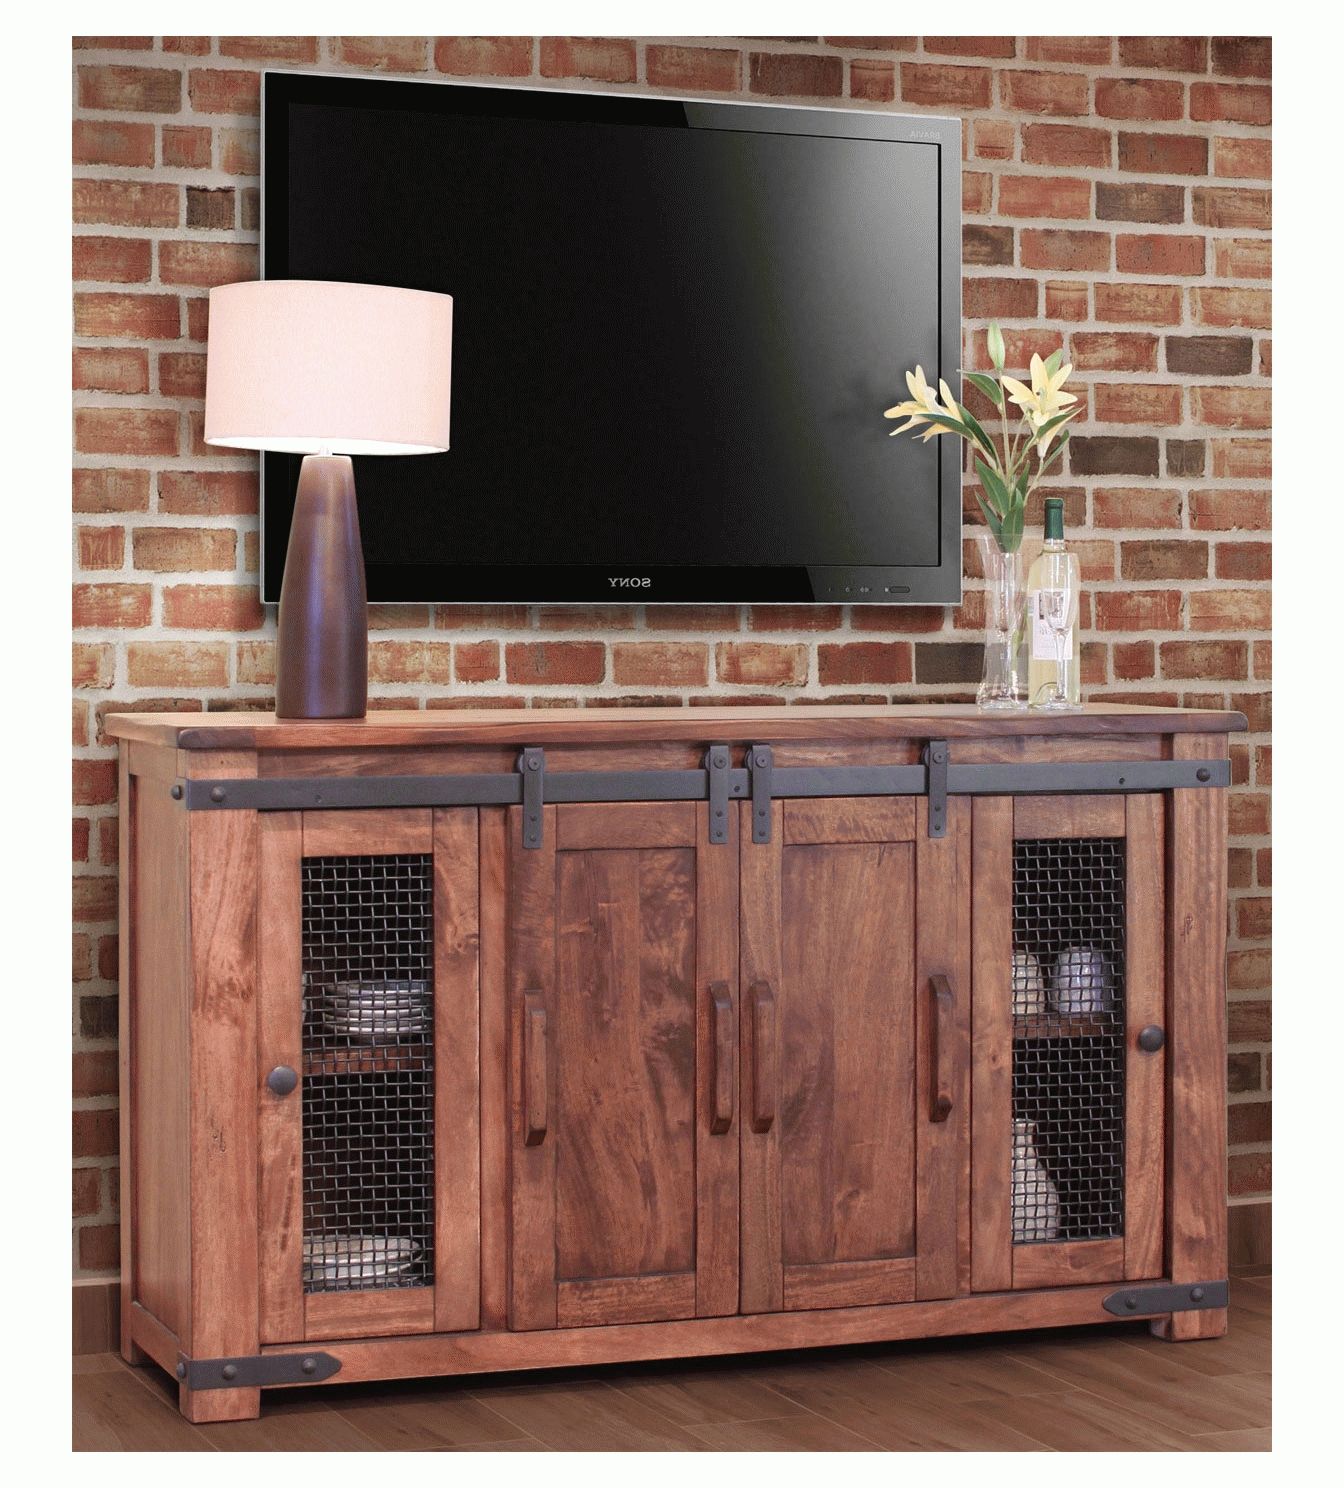 Rustic Barn Door Tv Stand, Barn Door Tv Stand, Barn Door Tv Console Within Rustic Wood Tv Cabinets (View 4 of 20)